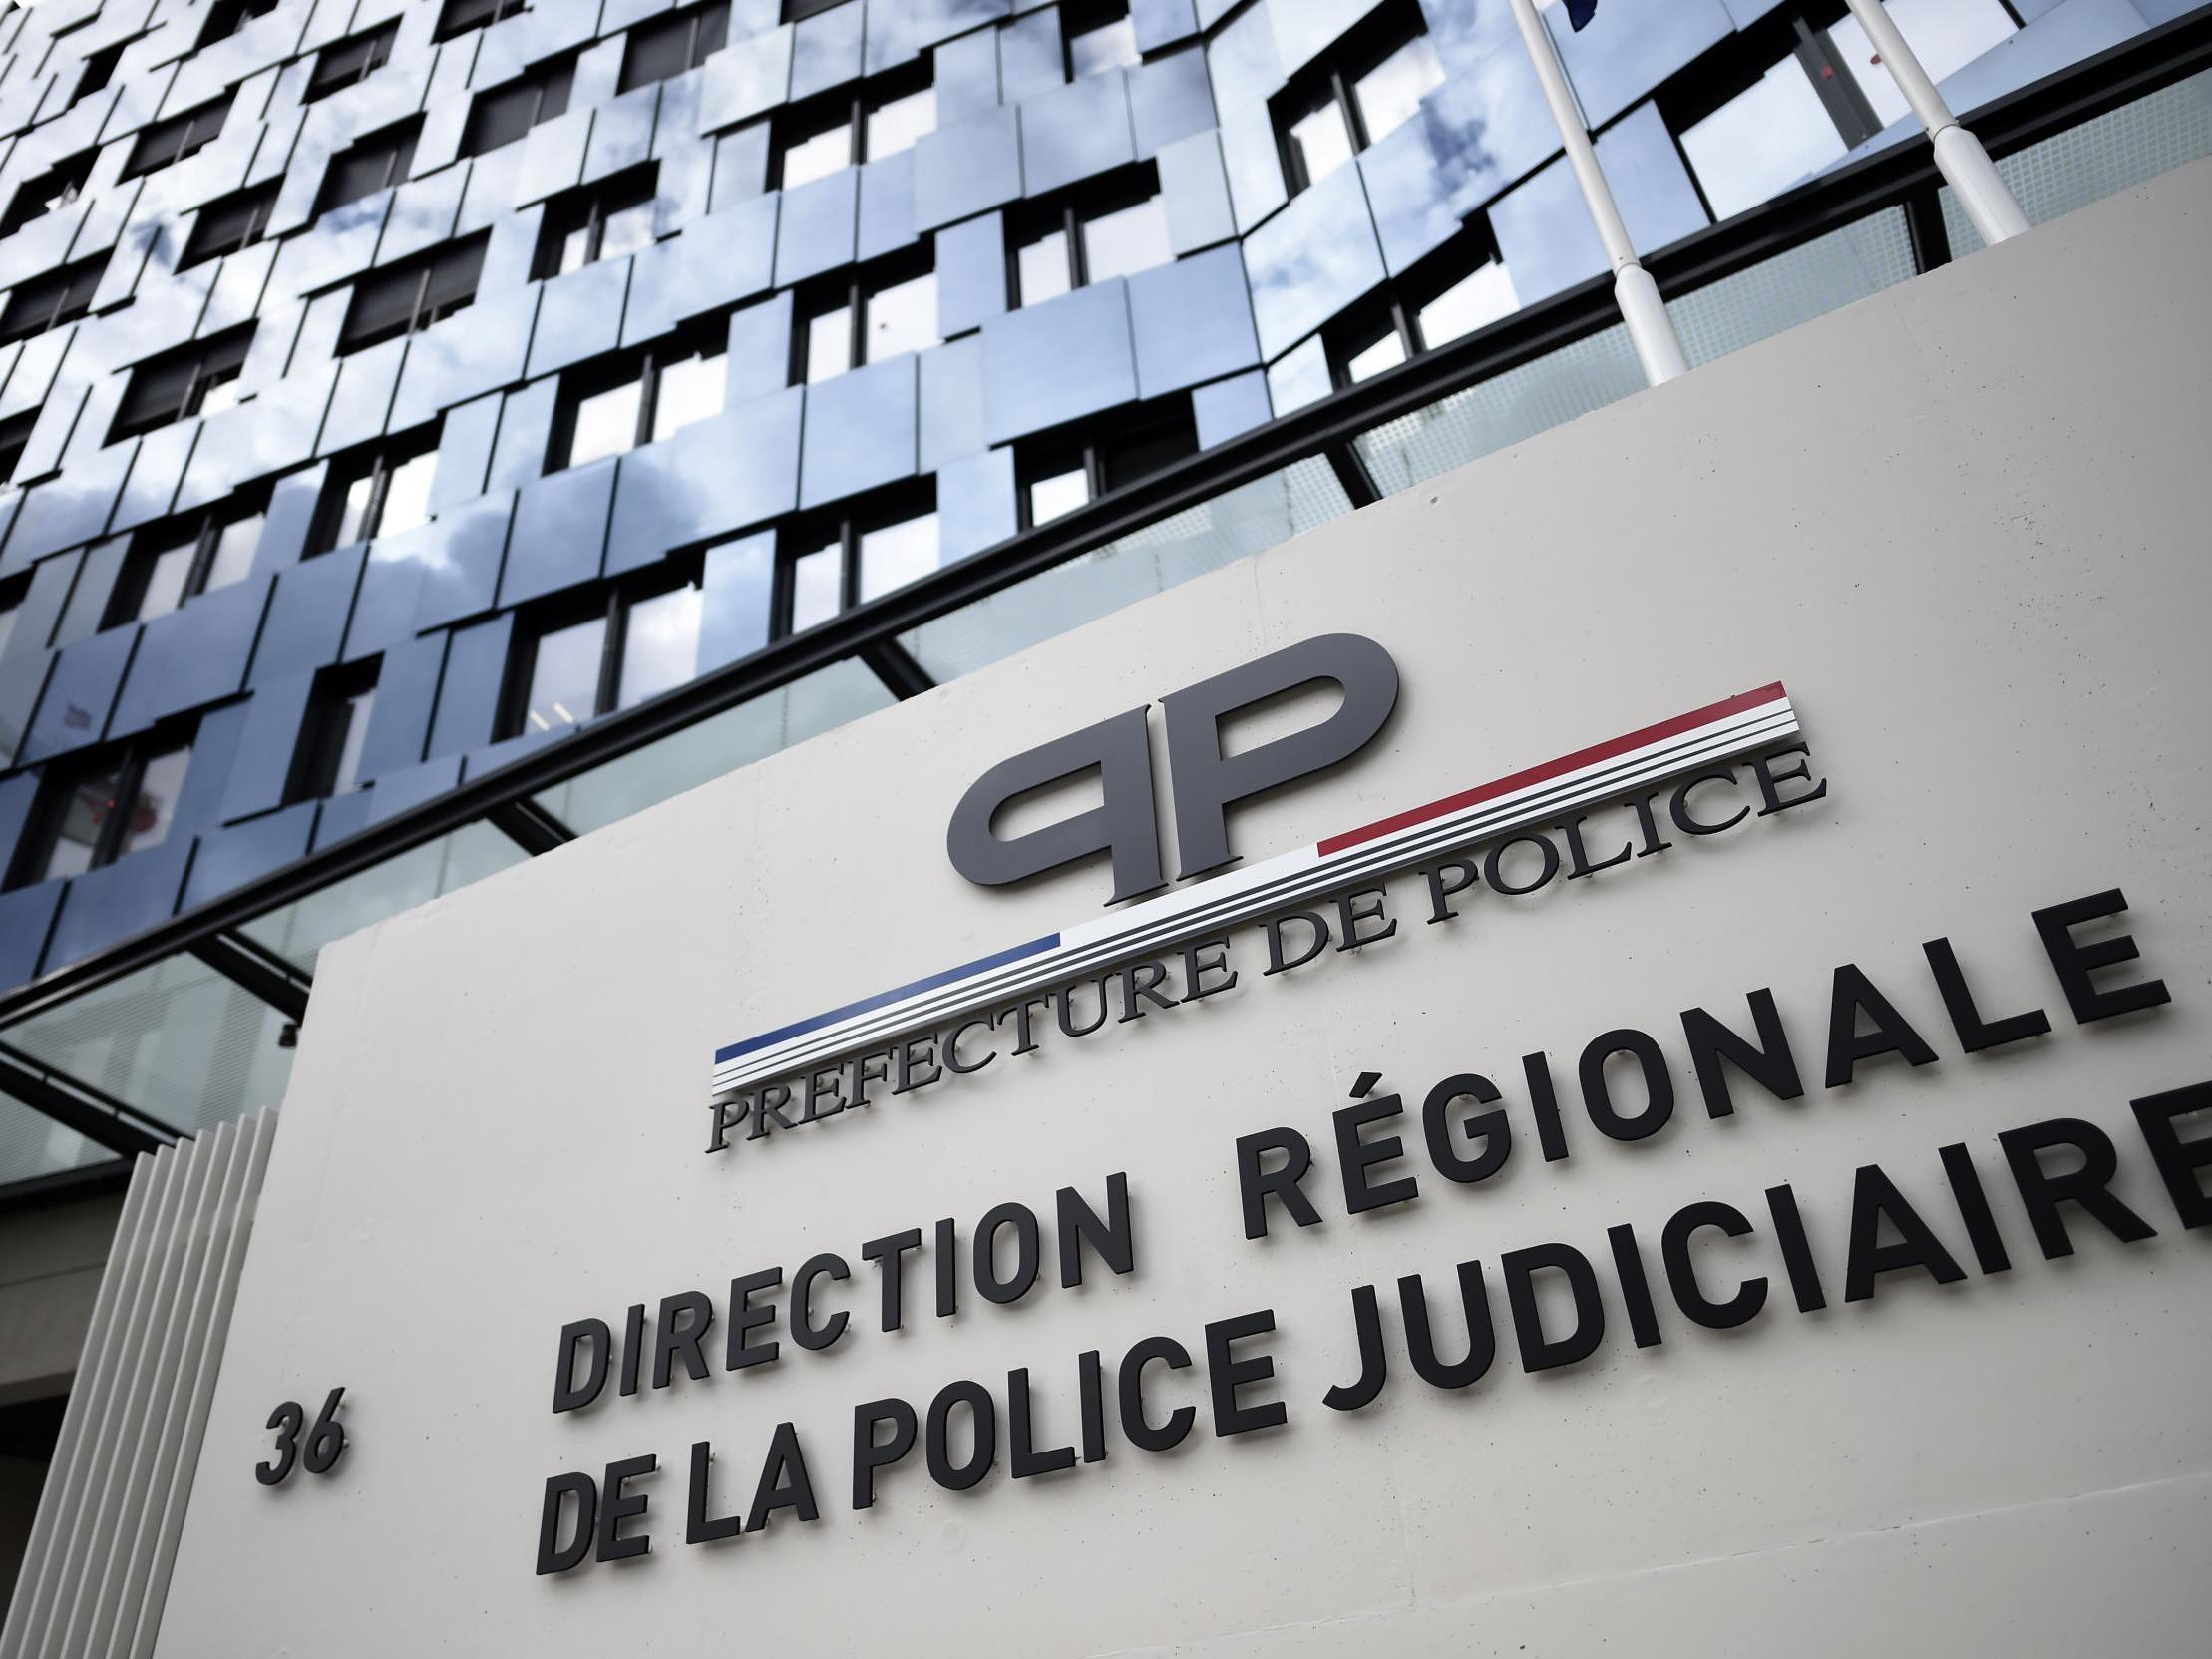 The new Paris police headquarters, where the accident happened